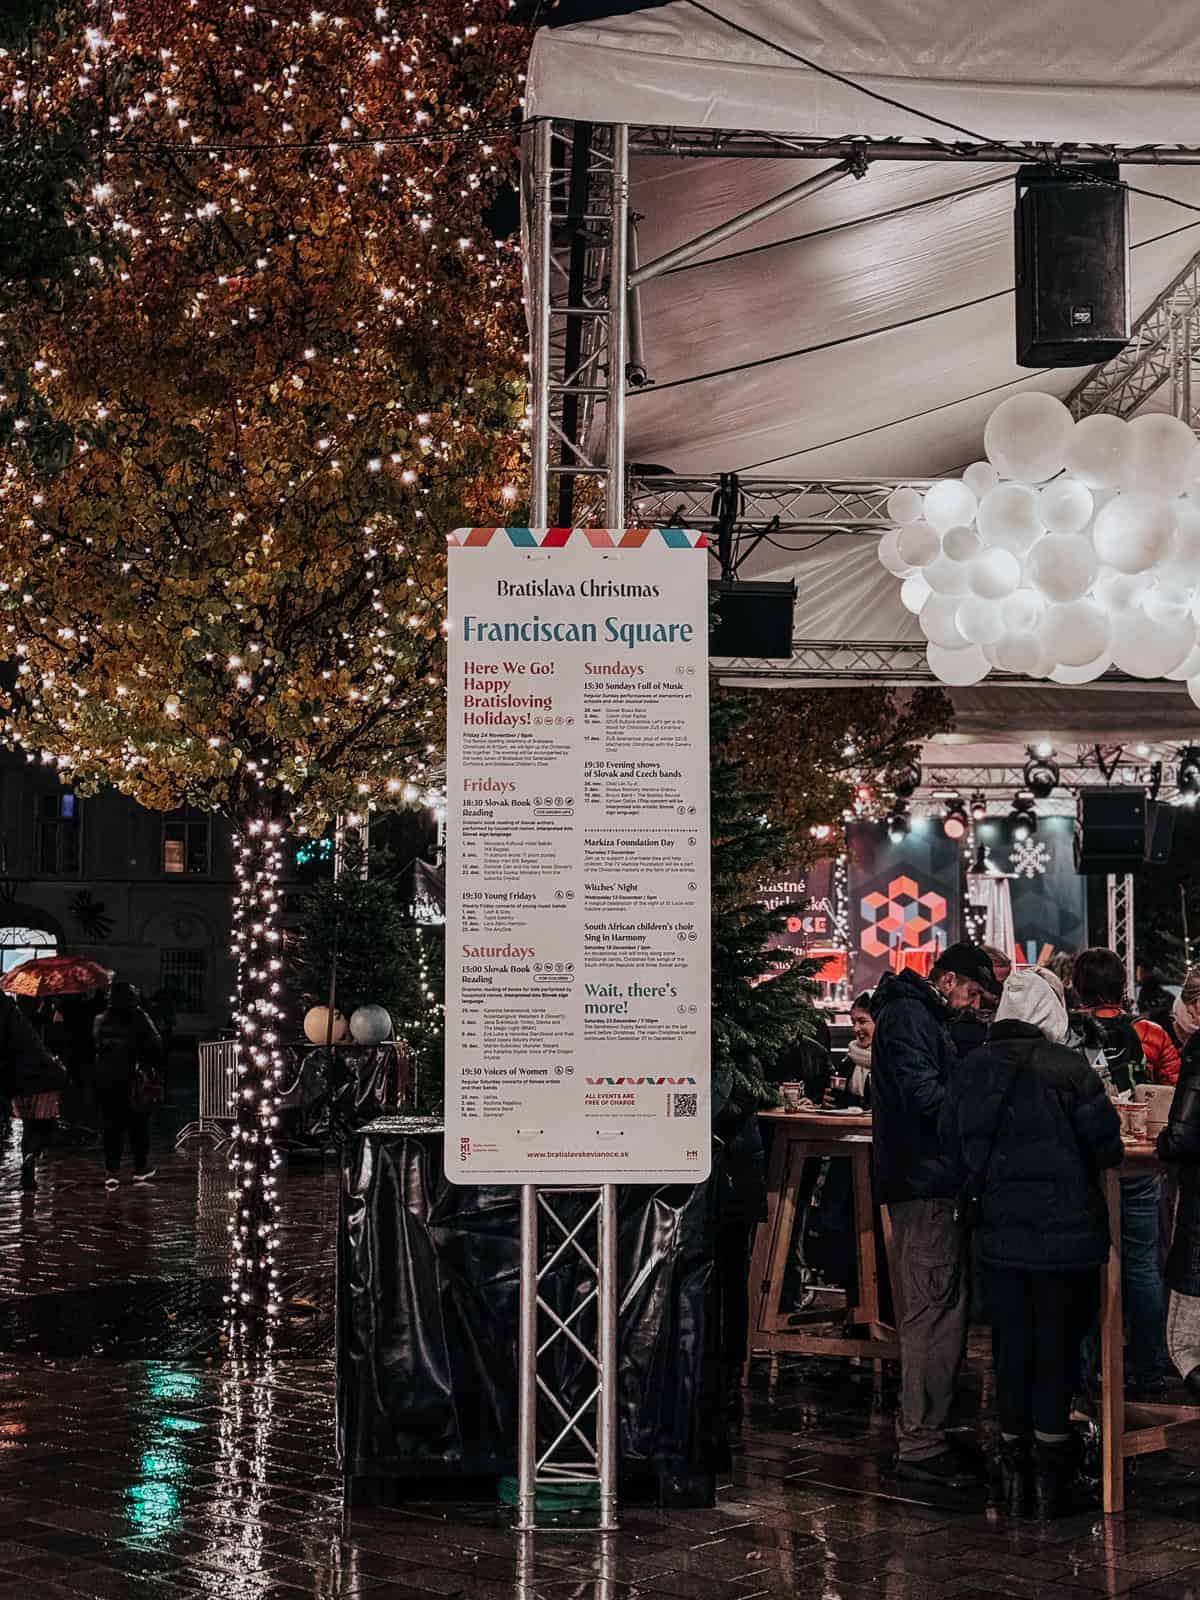 A detailed view of a Christmas market event sign at Franciscan Square in Bratislava, surrounded by lit-up trees and people enjoying the market under sheltered areas in rainy weather.